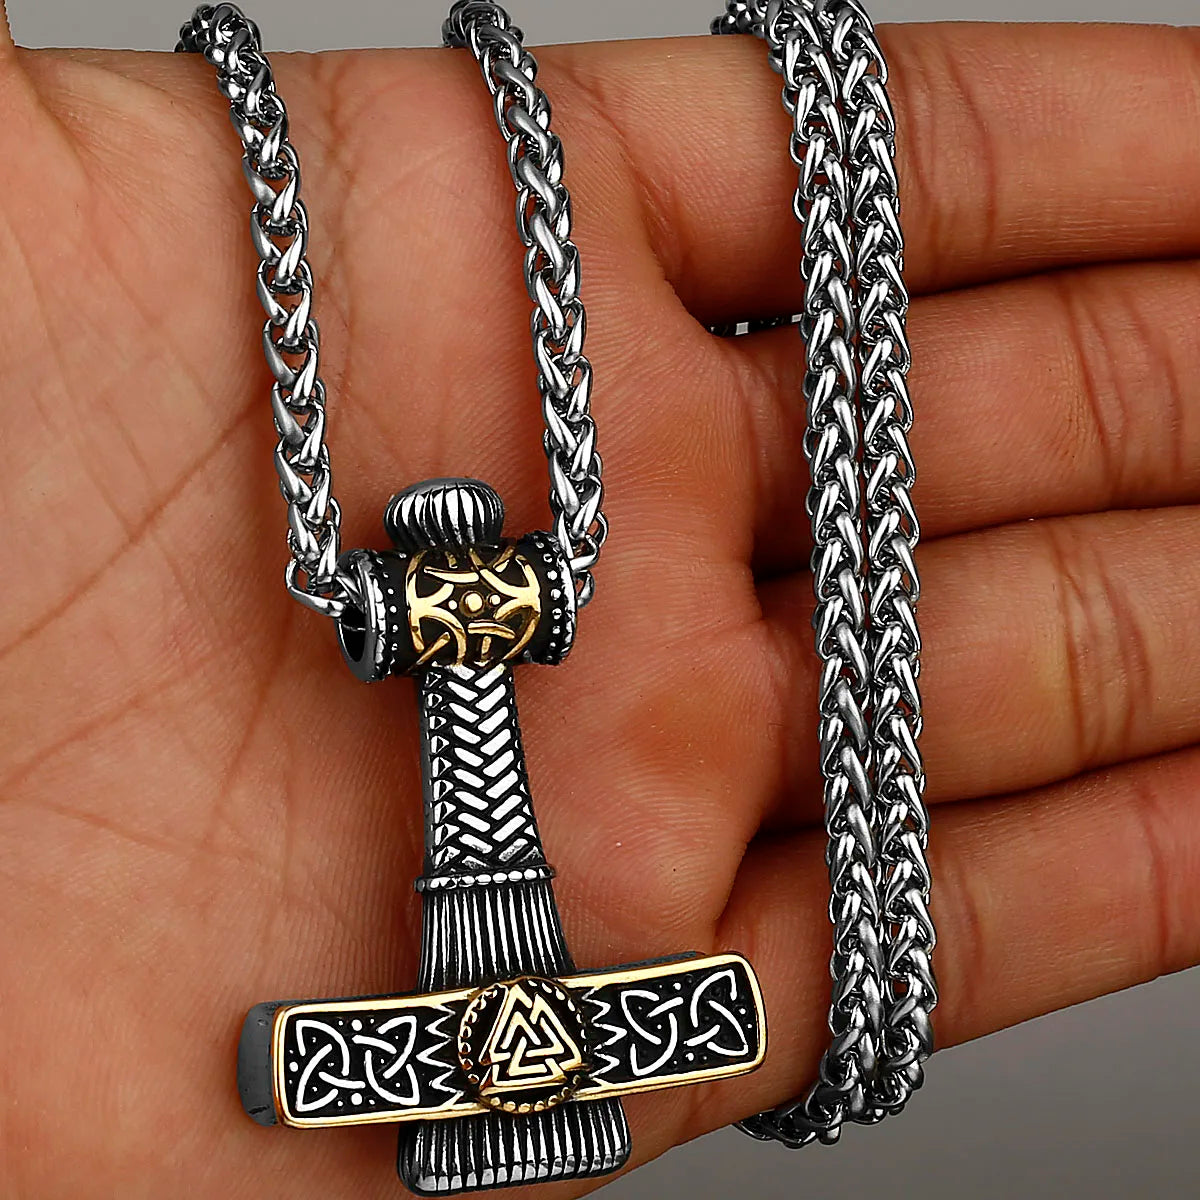 Mjolnir Necklace with Valknut Relief Stainless Steel Necklace